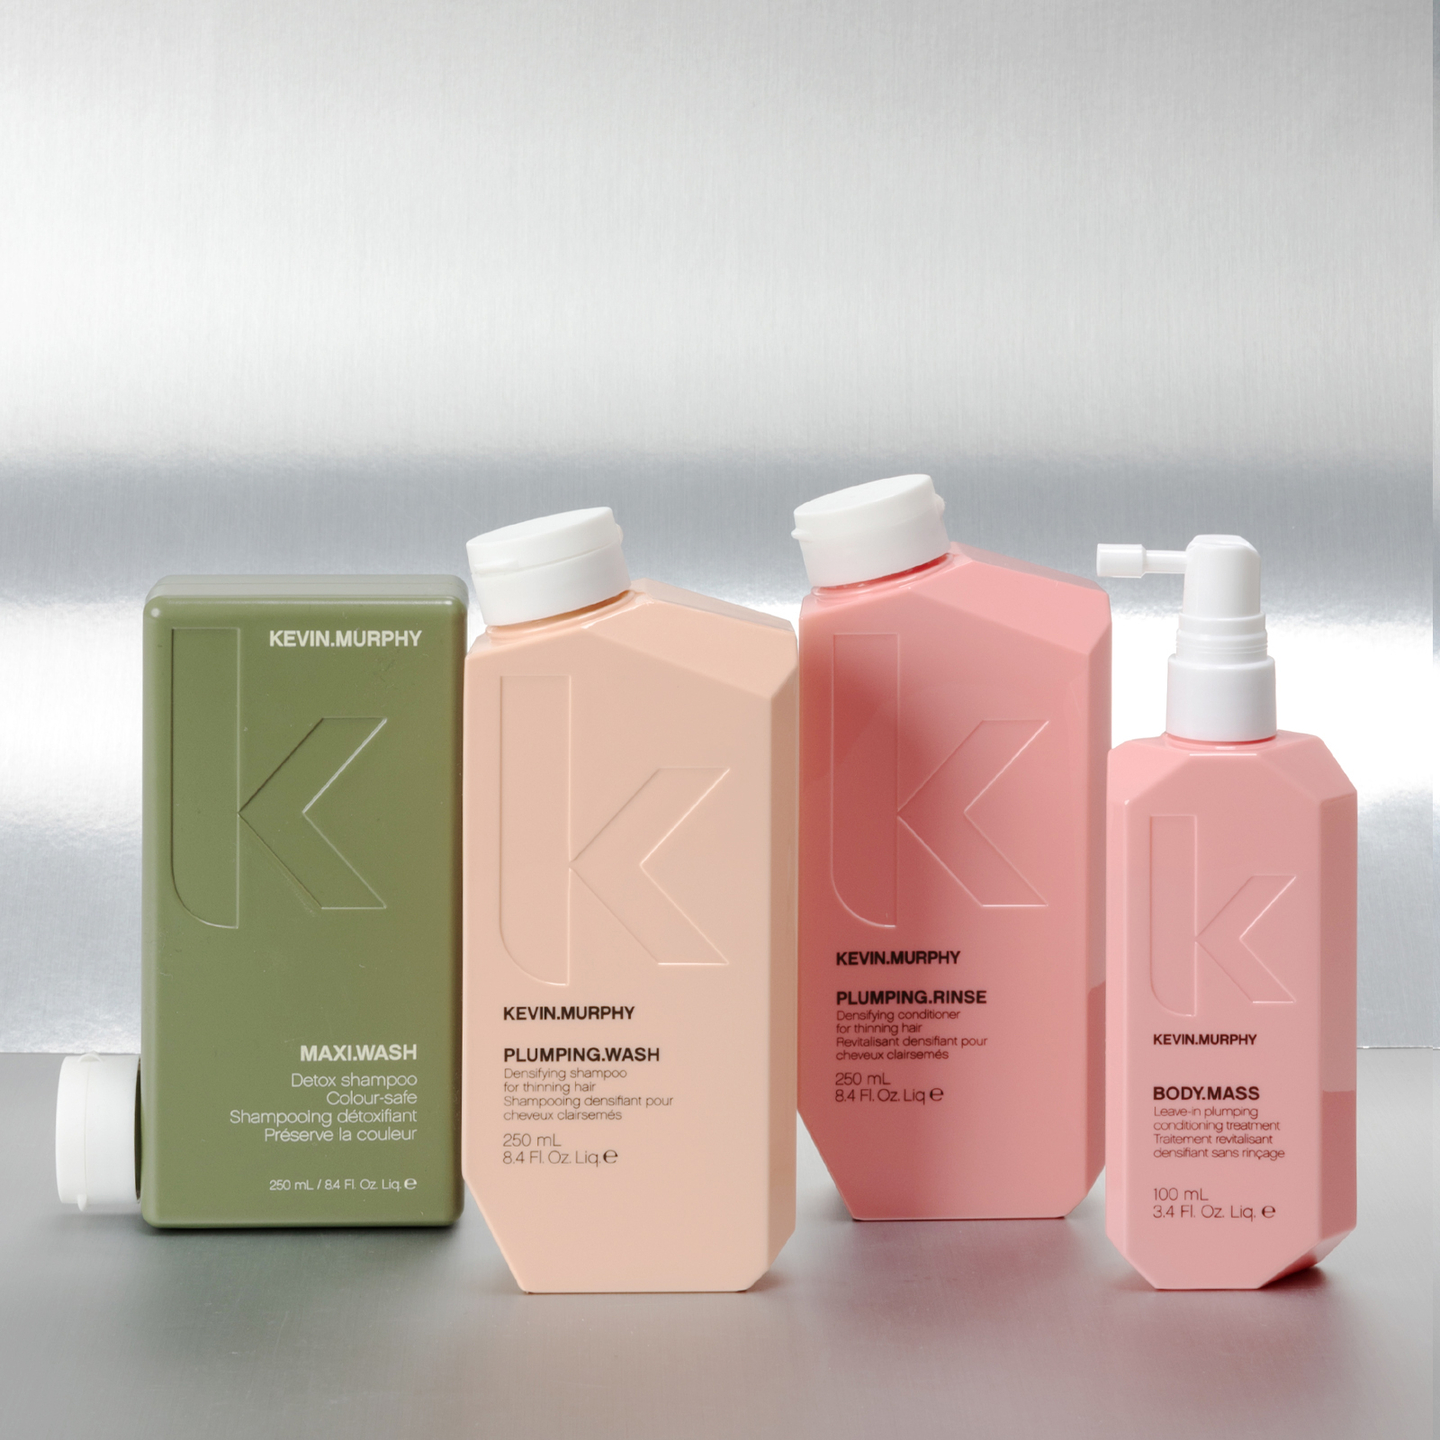 Kevin Murphy plumping collection: MAXI.WASH shampoo, PLUMPING.WASH, PLUMPING.RINSE, and BODY.MASS treatment for thickness.